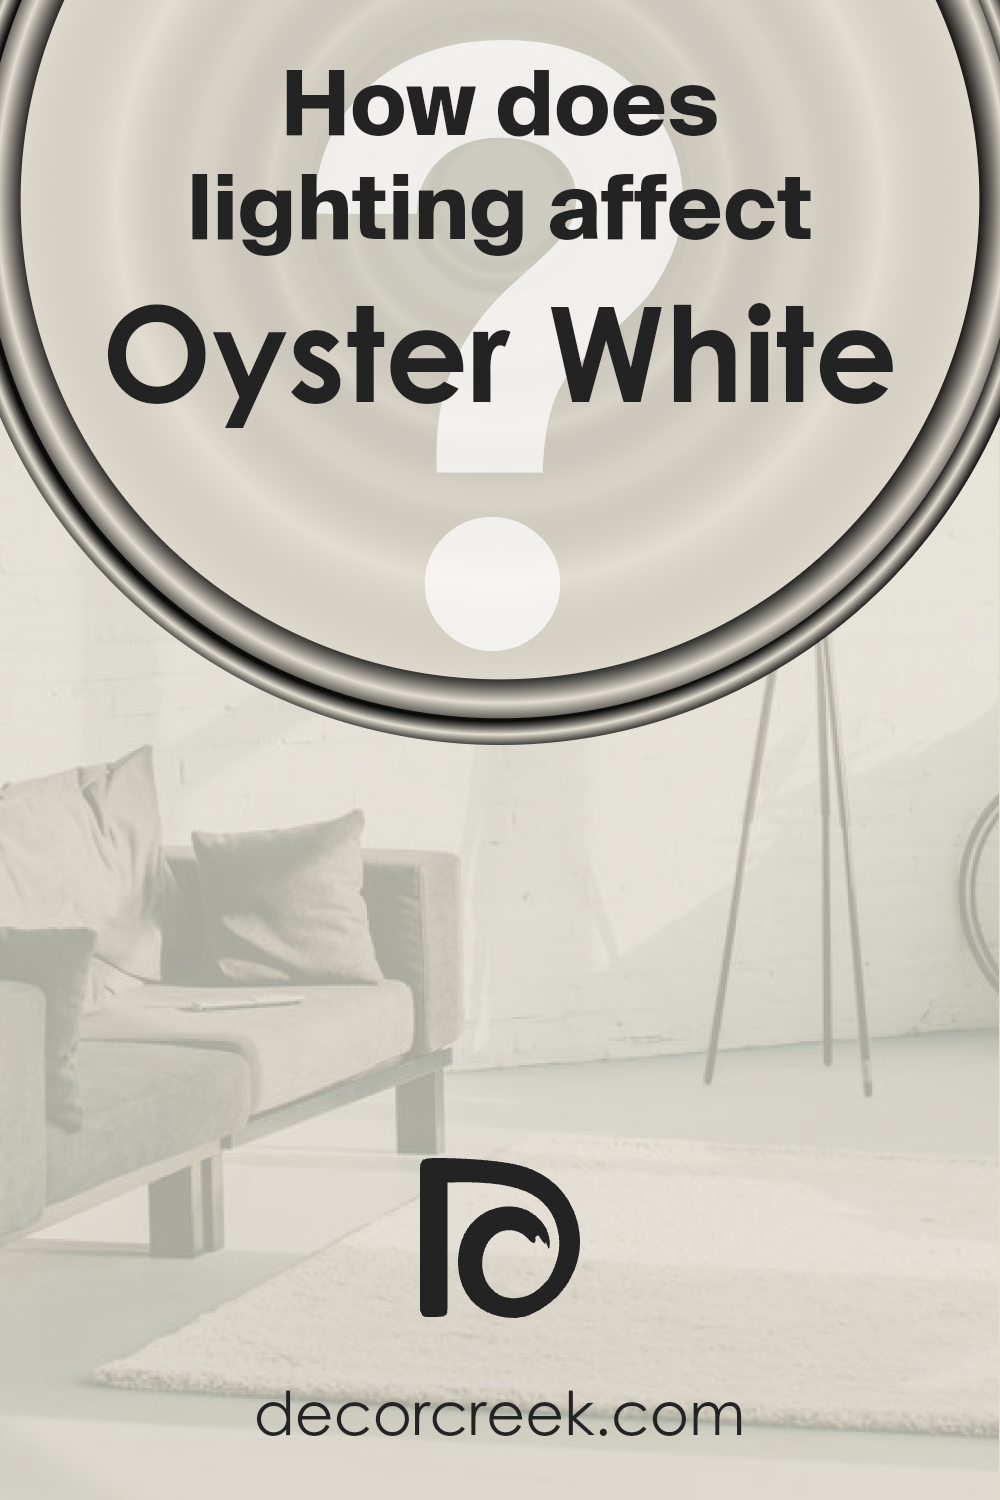 how_does_lighting_affect_oyster_white_sw_7637